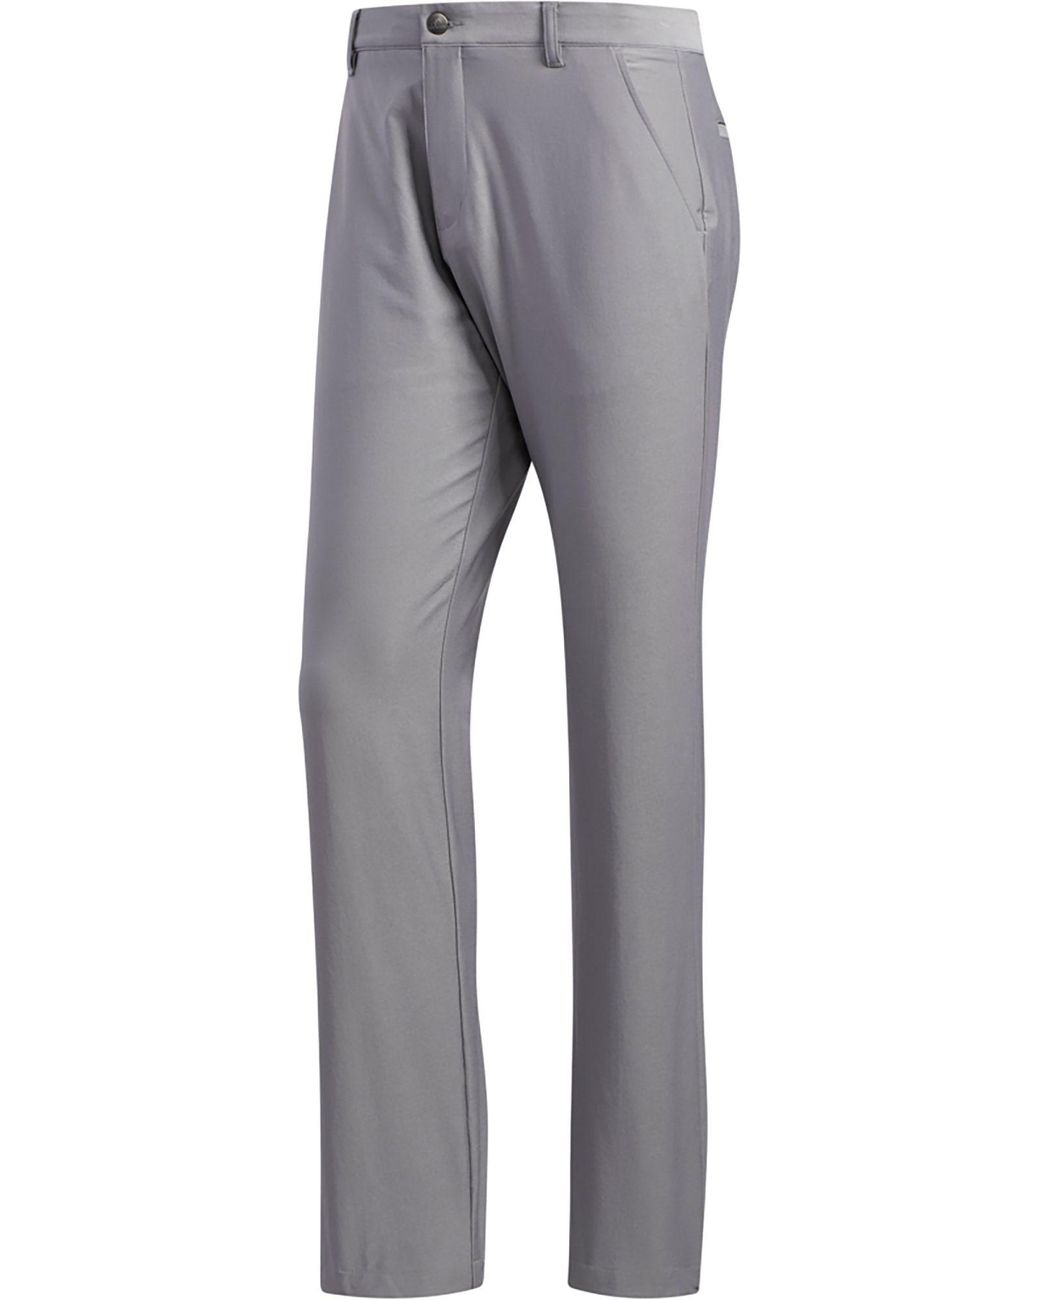 adidas Ultimate365 Classic Golf Pants in Gray for Men - Lyst